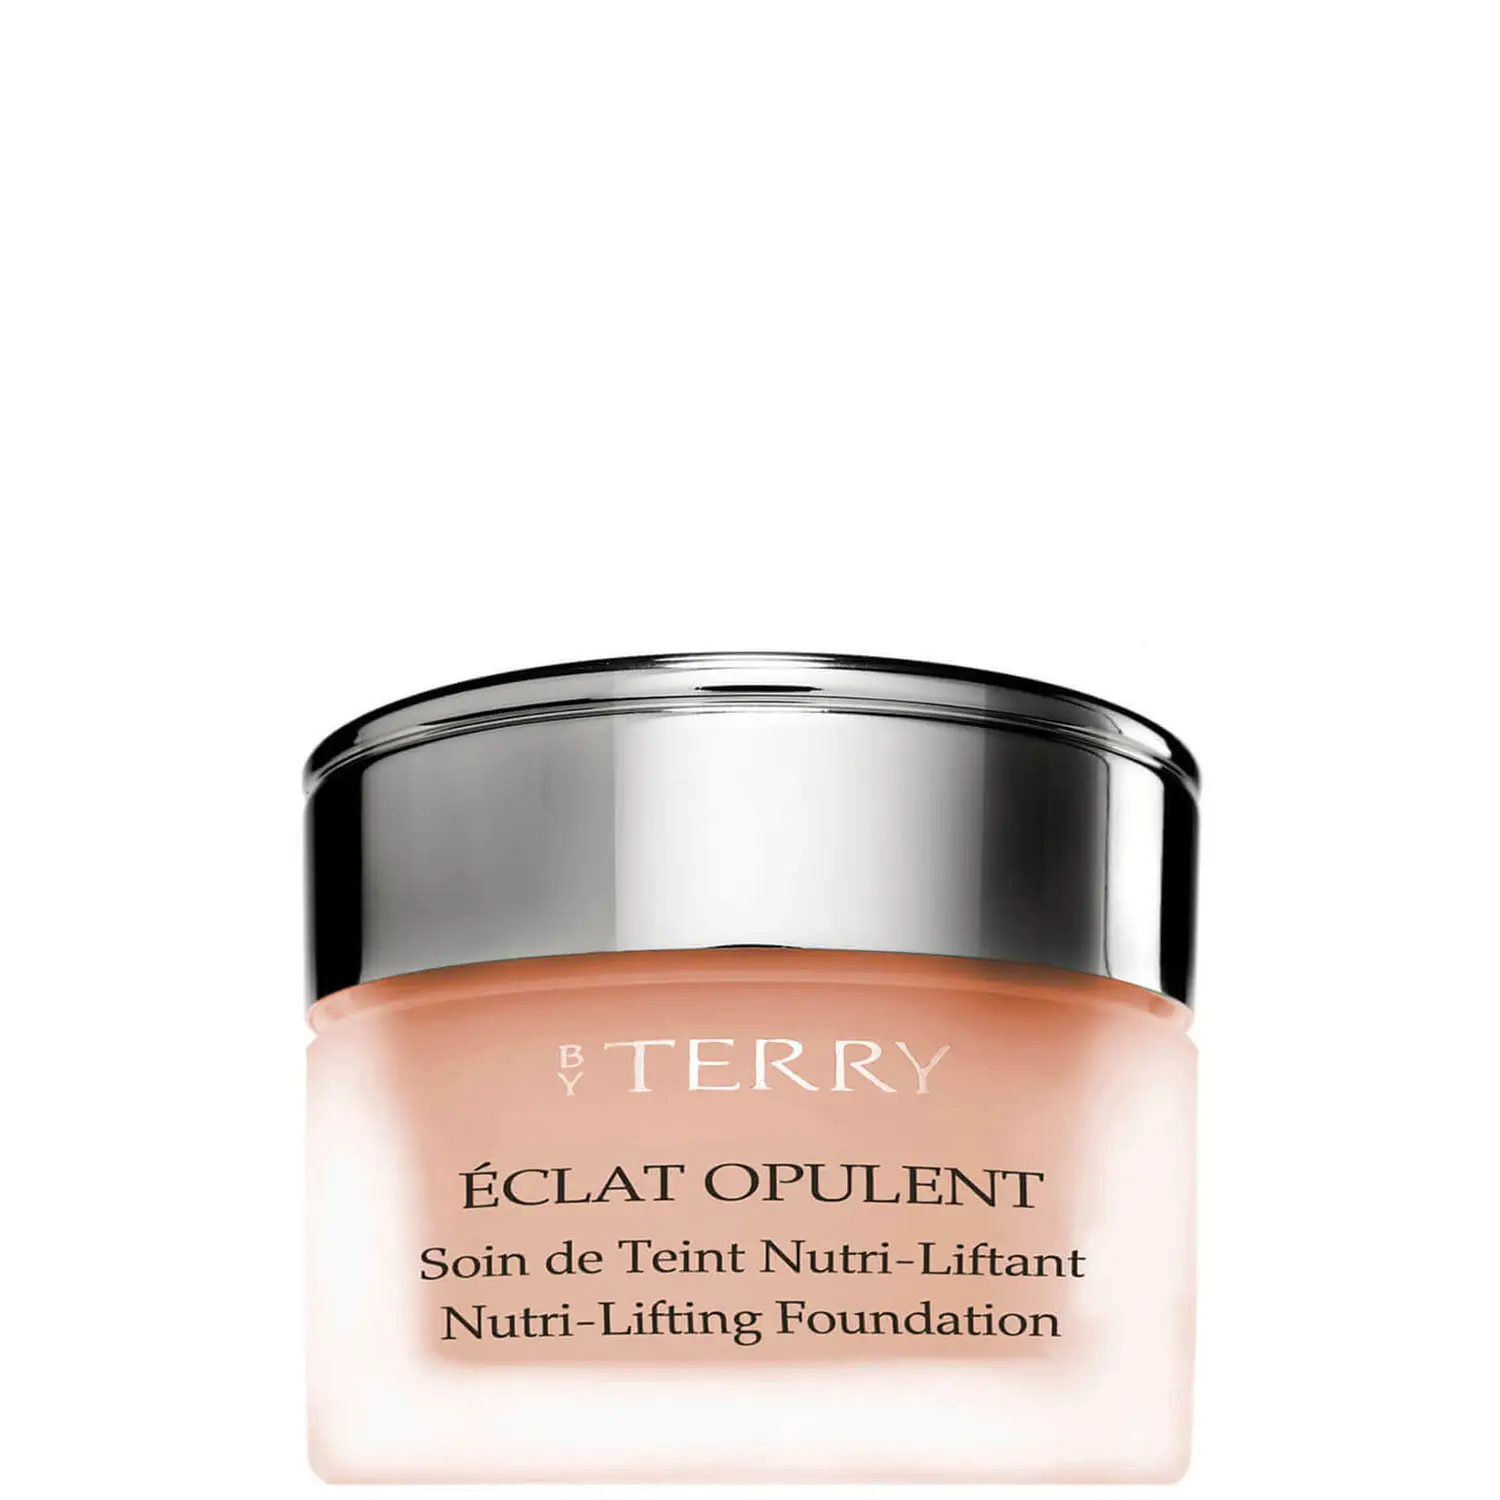 BY TERRY ECLAT OPULENT NUTRI-LIFTING FOUNDATION £105.00